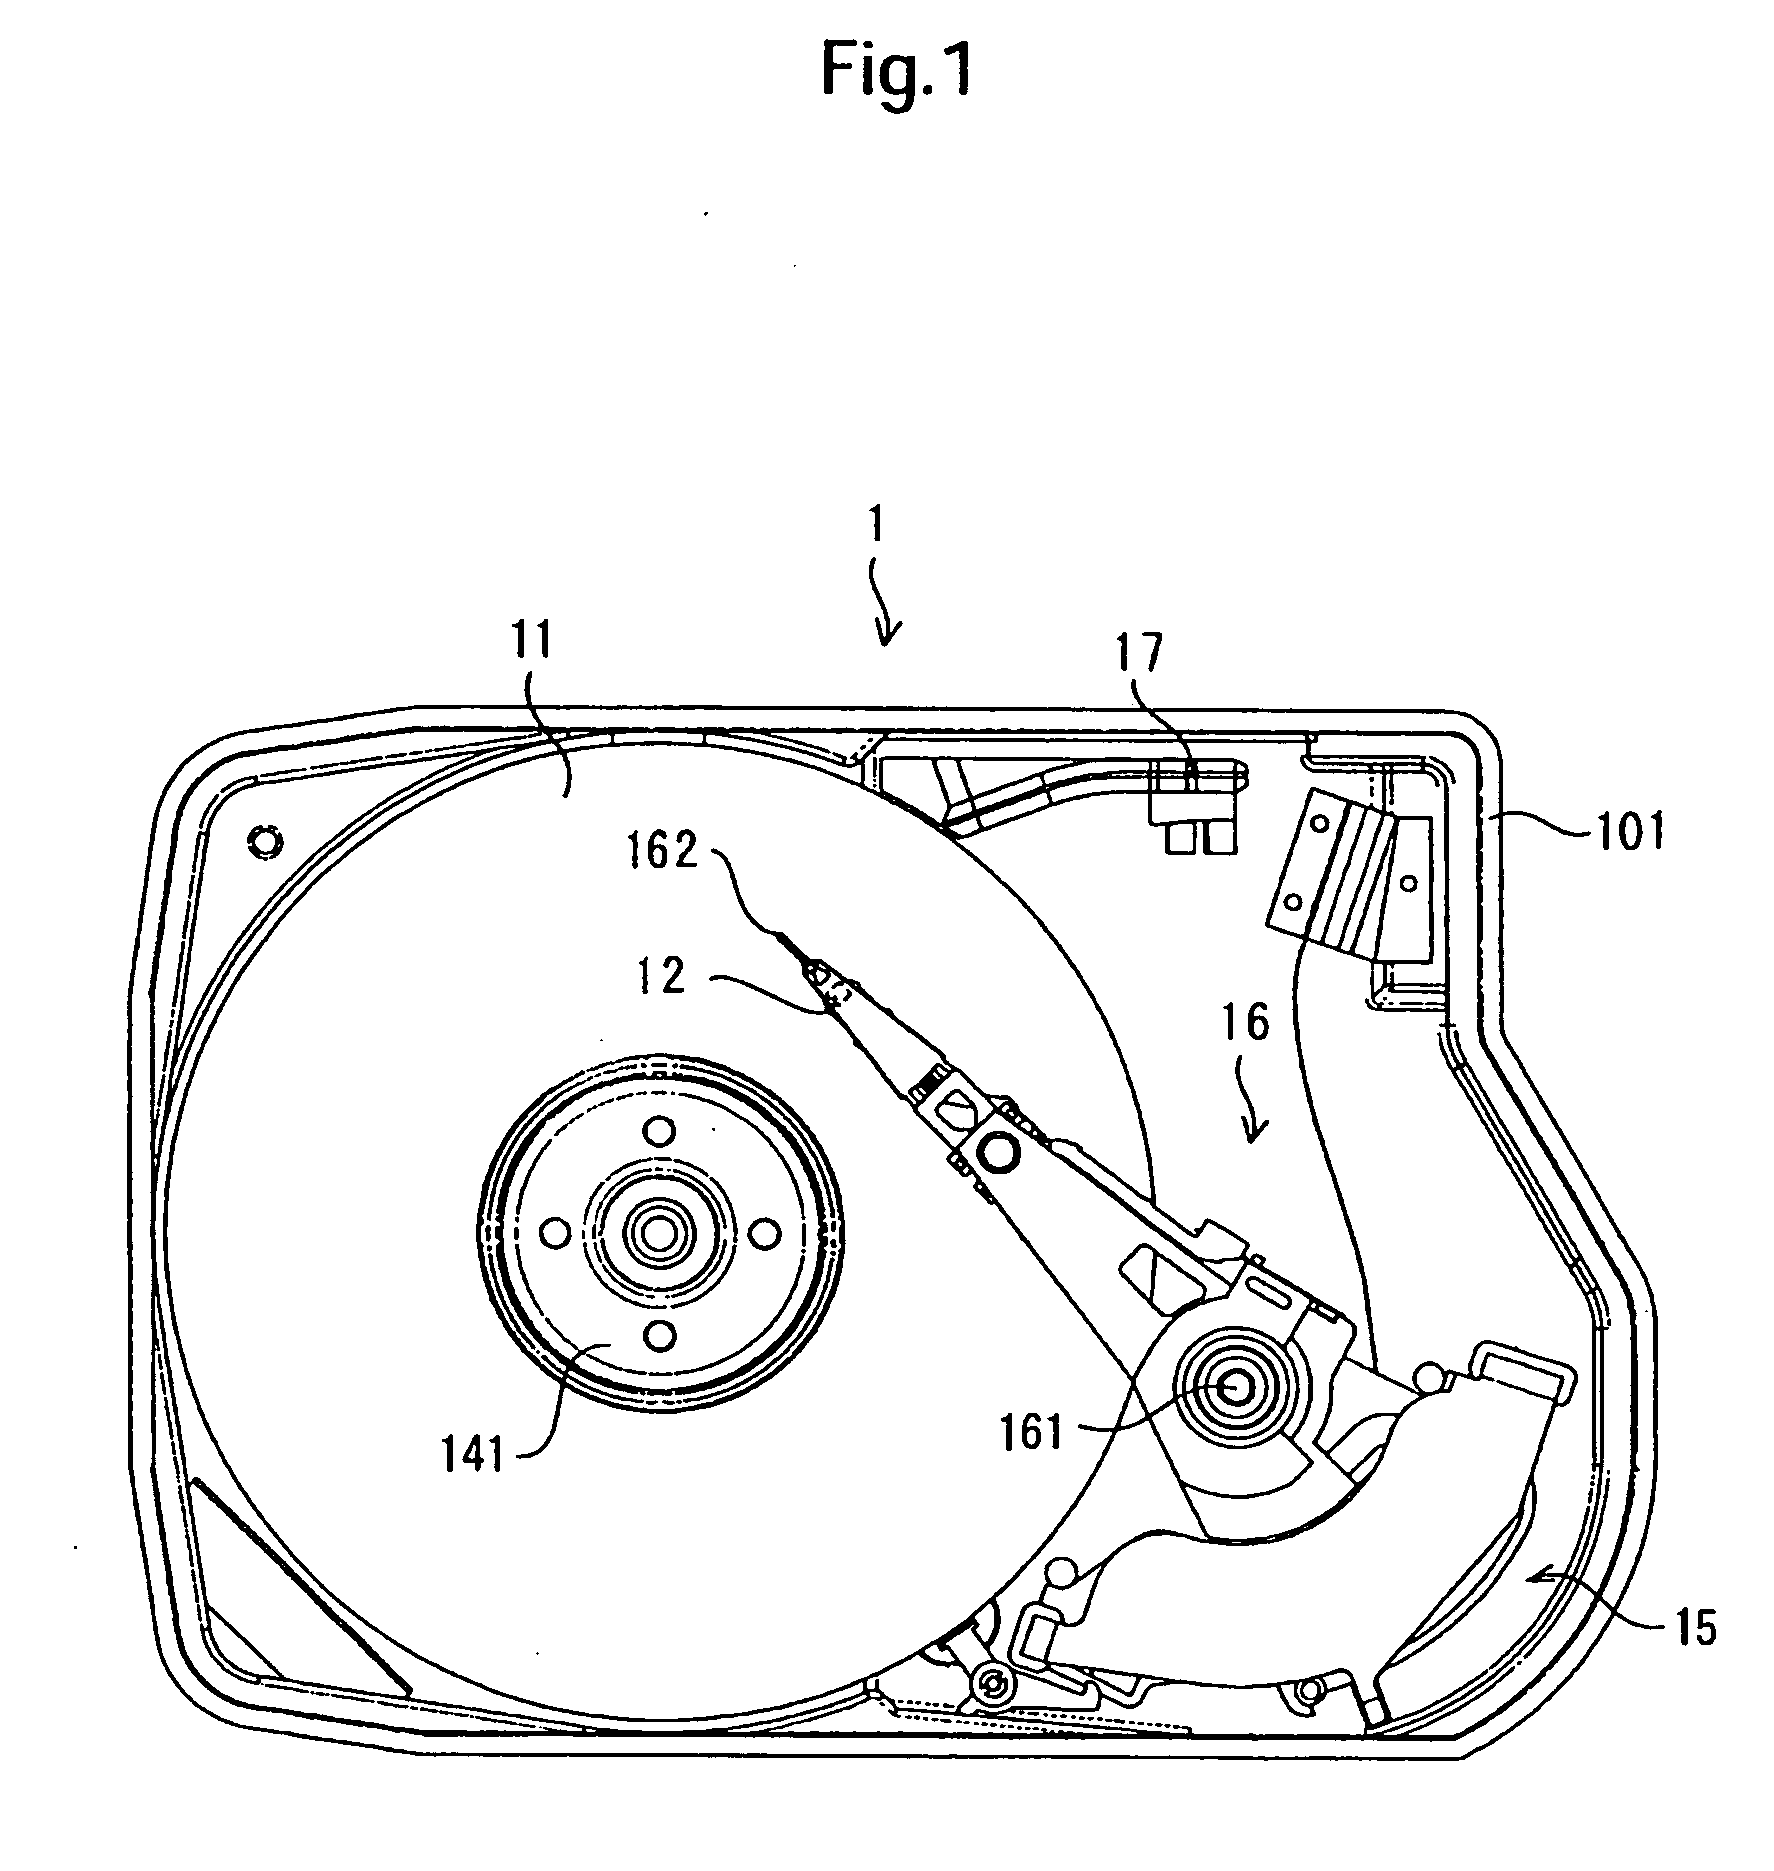 Disk drive with heater for slider and control method thereof